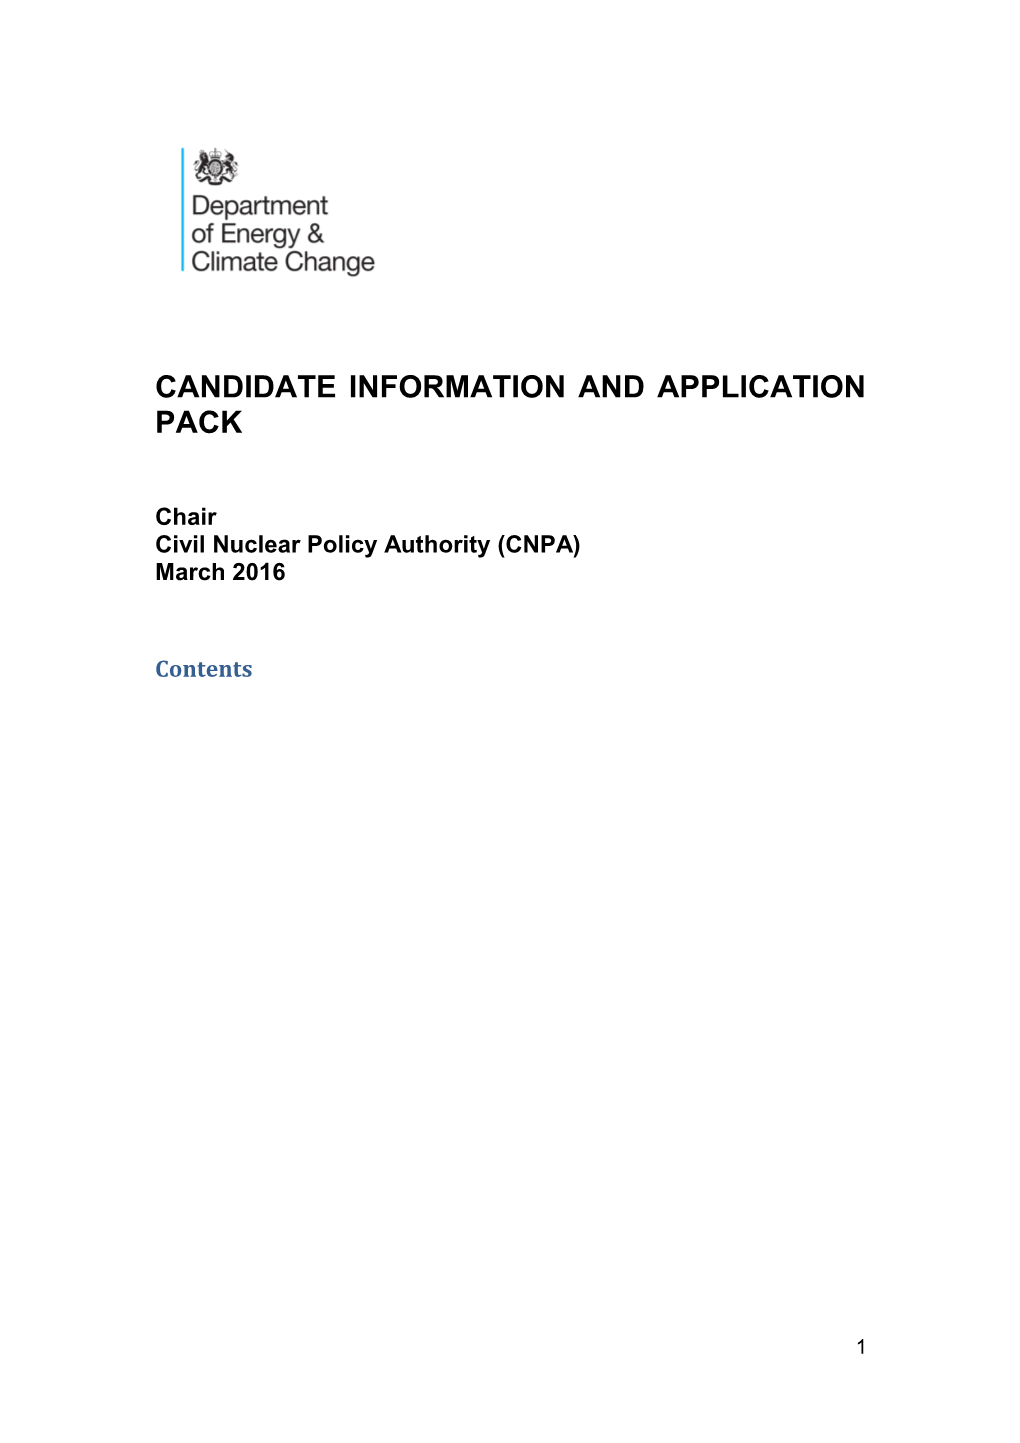 Candidate Information and Application Pack